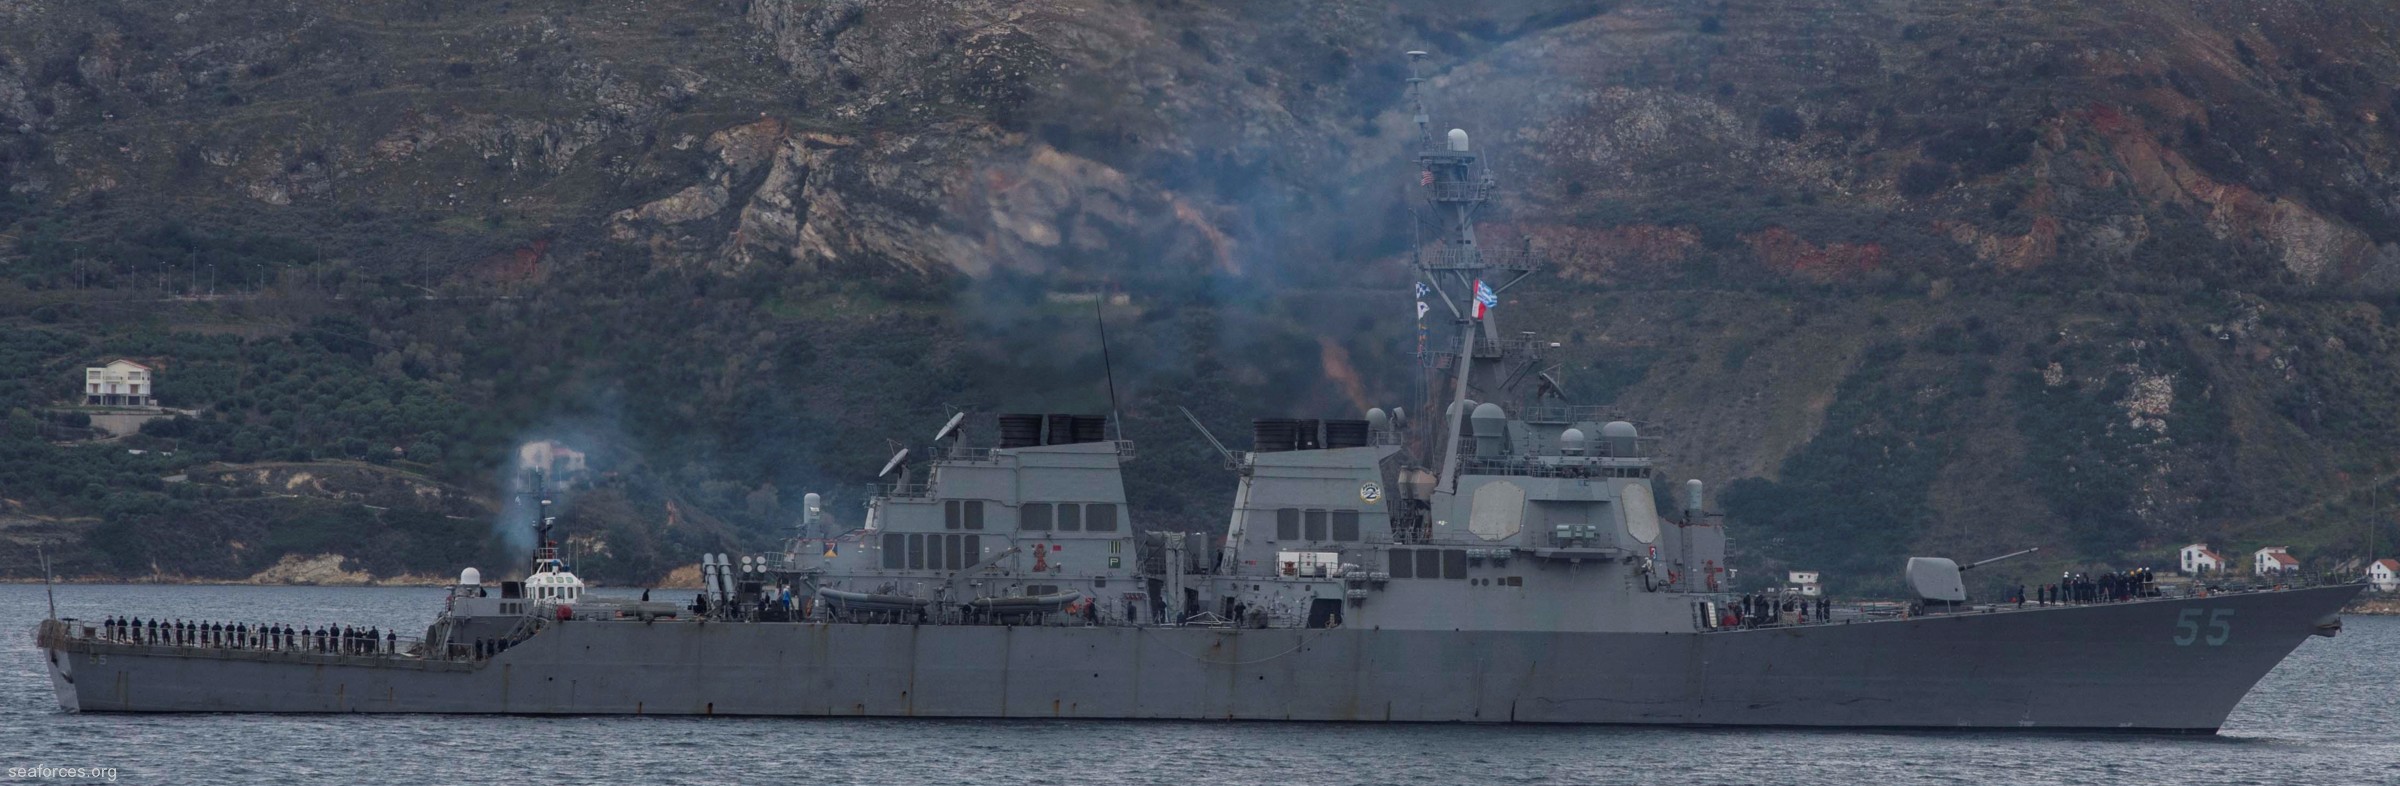 ddg-55 uss stout guided missile destroyer us navy 55 souda bay crete greece